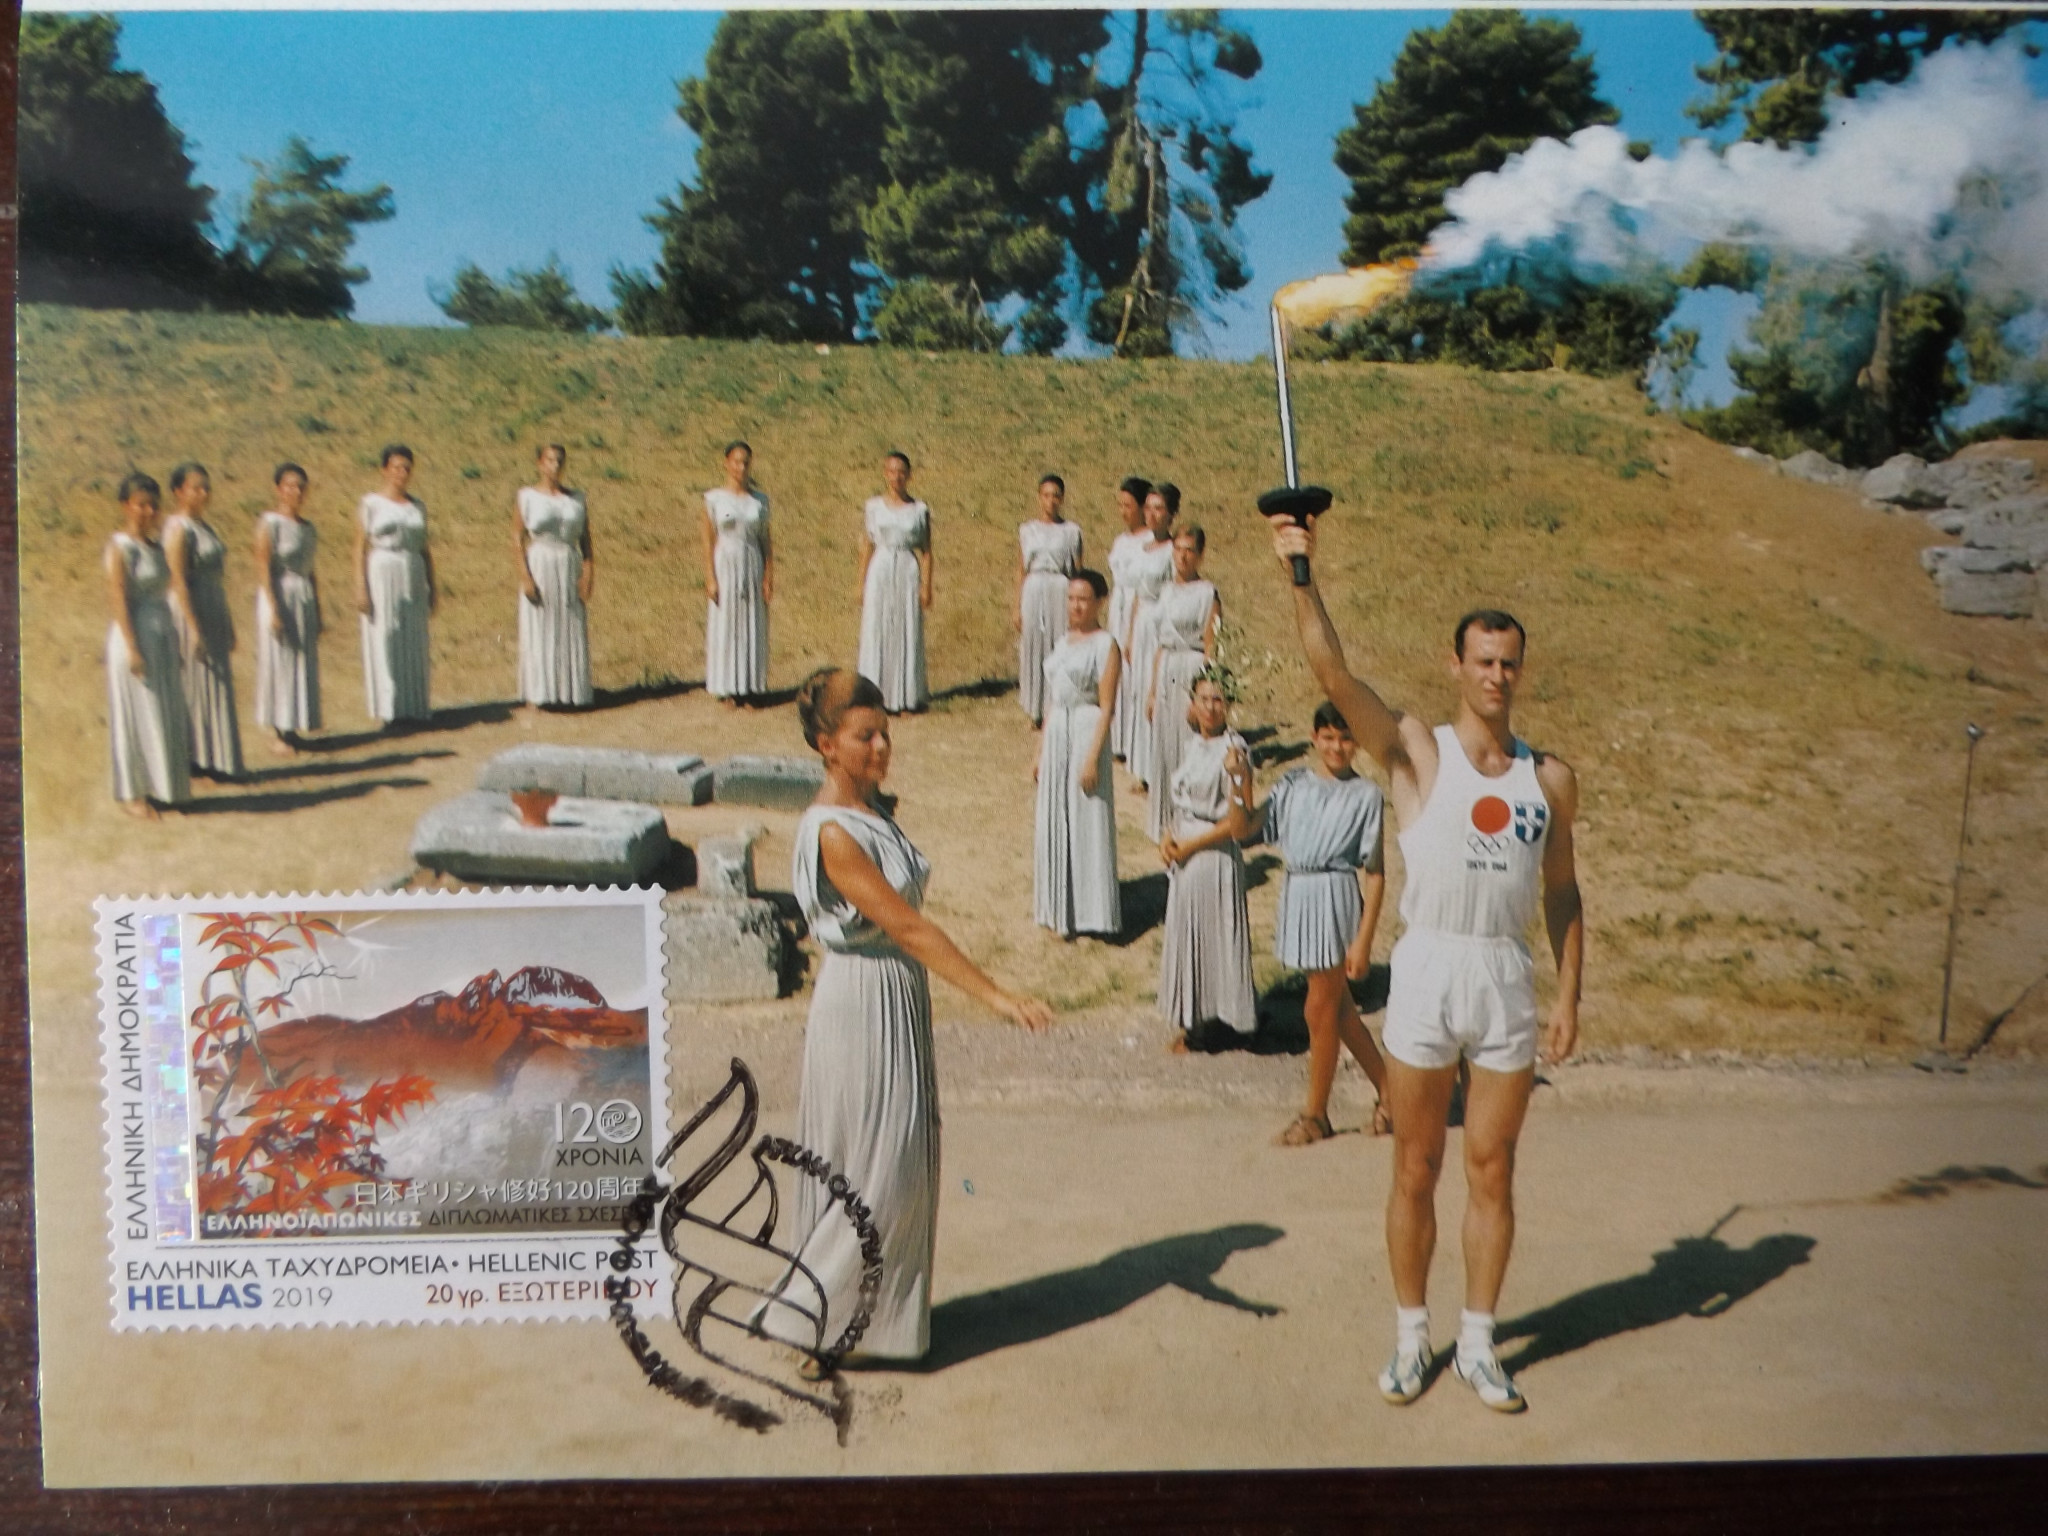 One of the commemorative postcards featuring the Torch Relay of 1964 ©Philip Barker